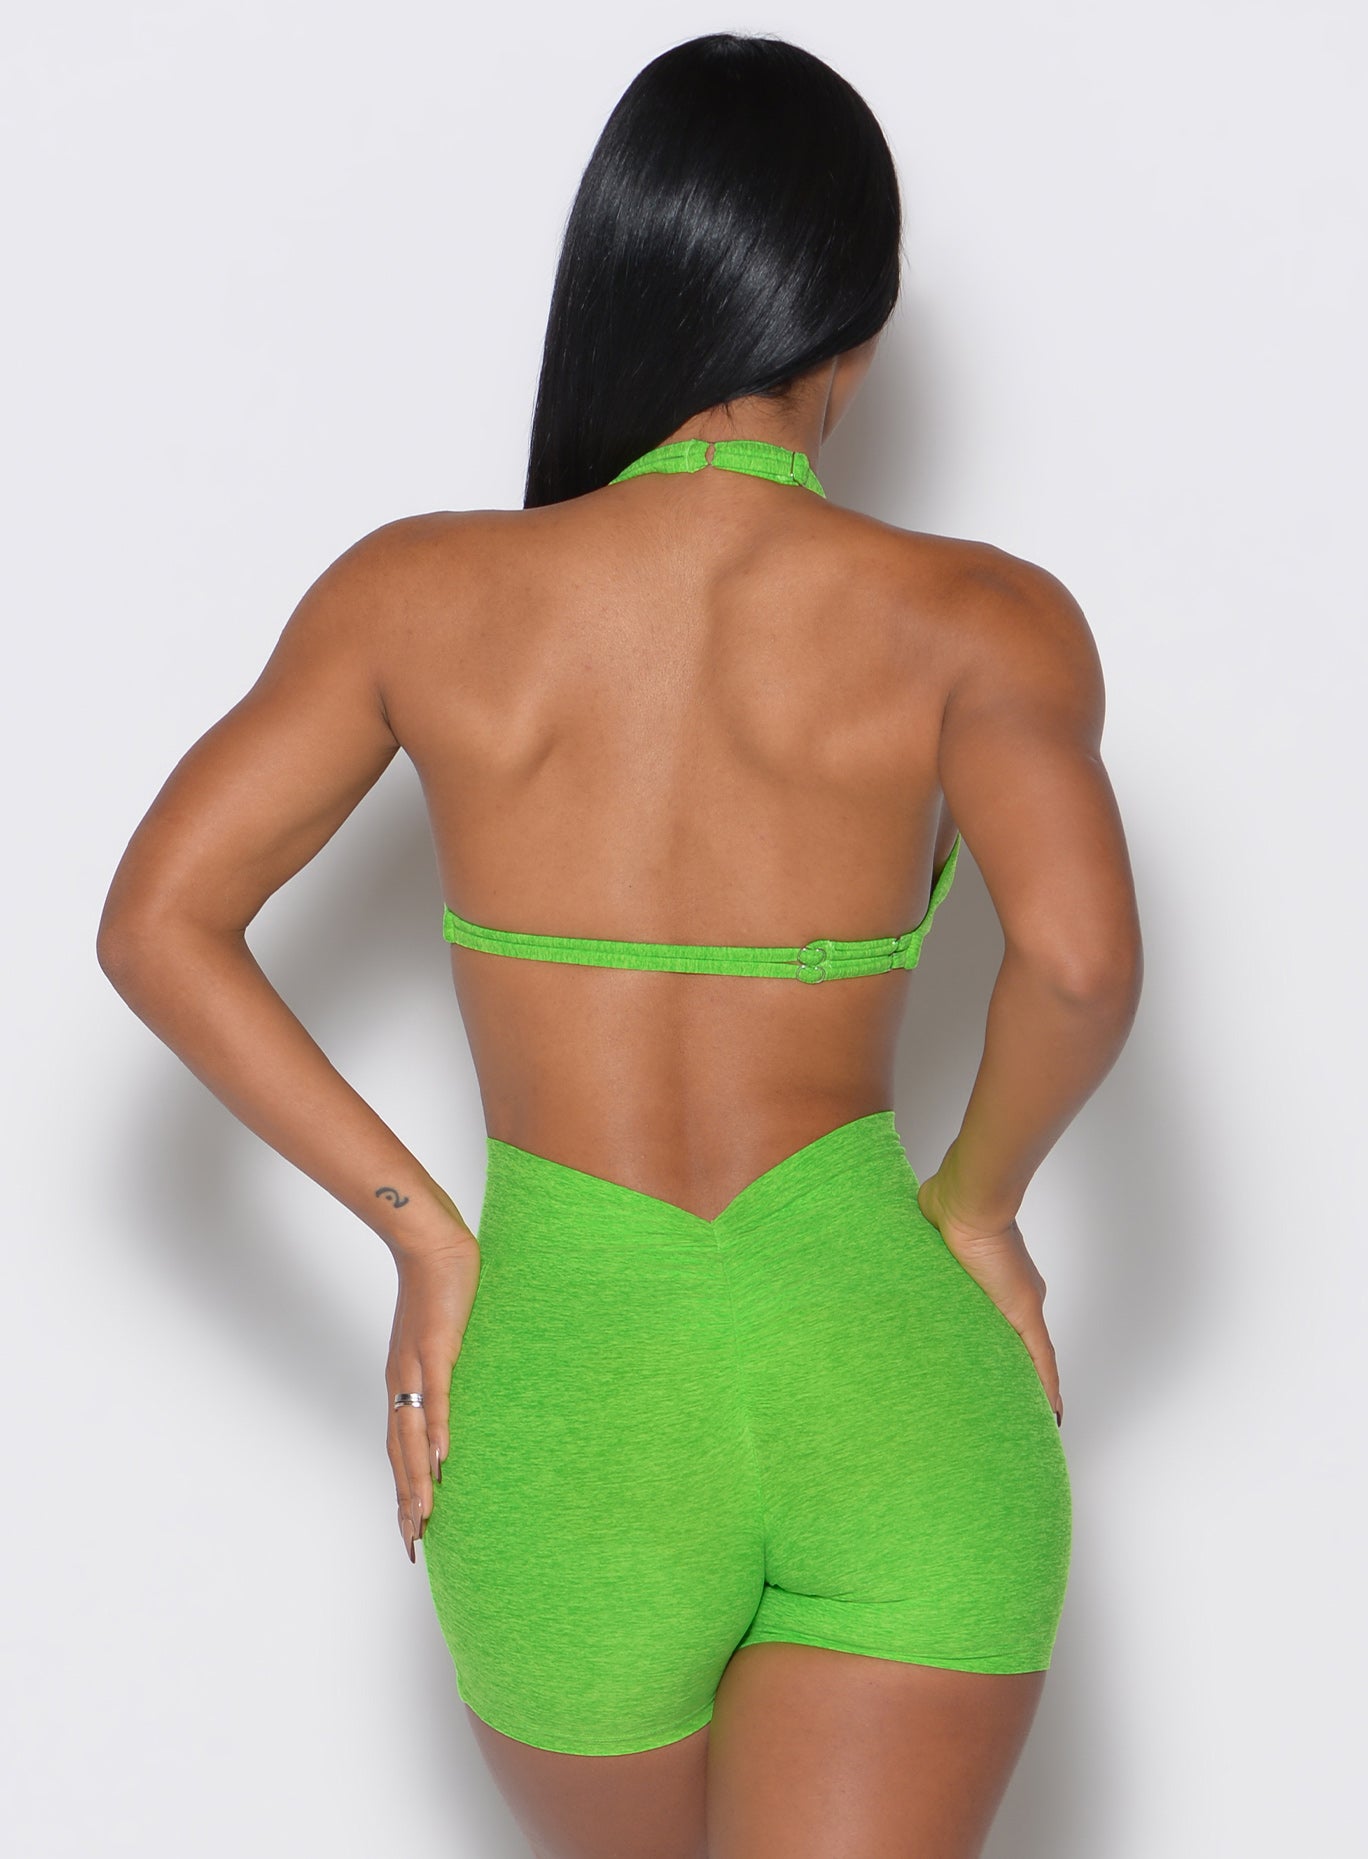 back profile view of a model wearing our butterfly sports bra in neon lime green color along with the matching shorts